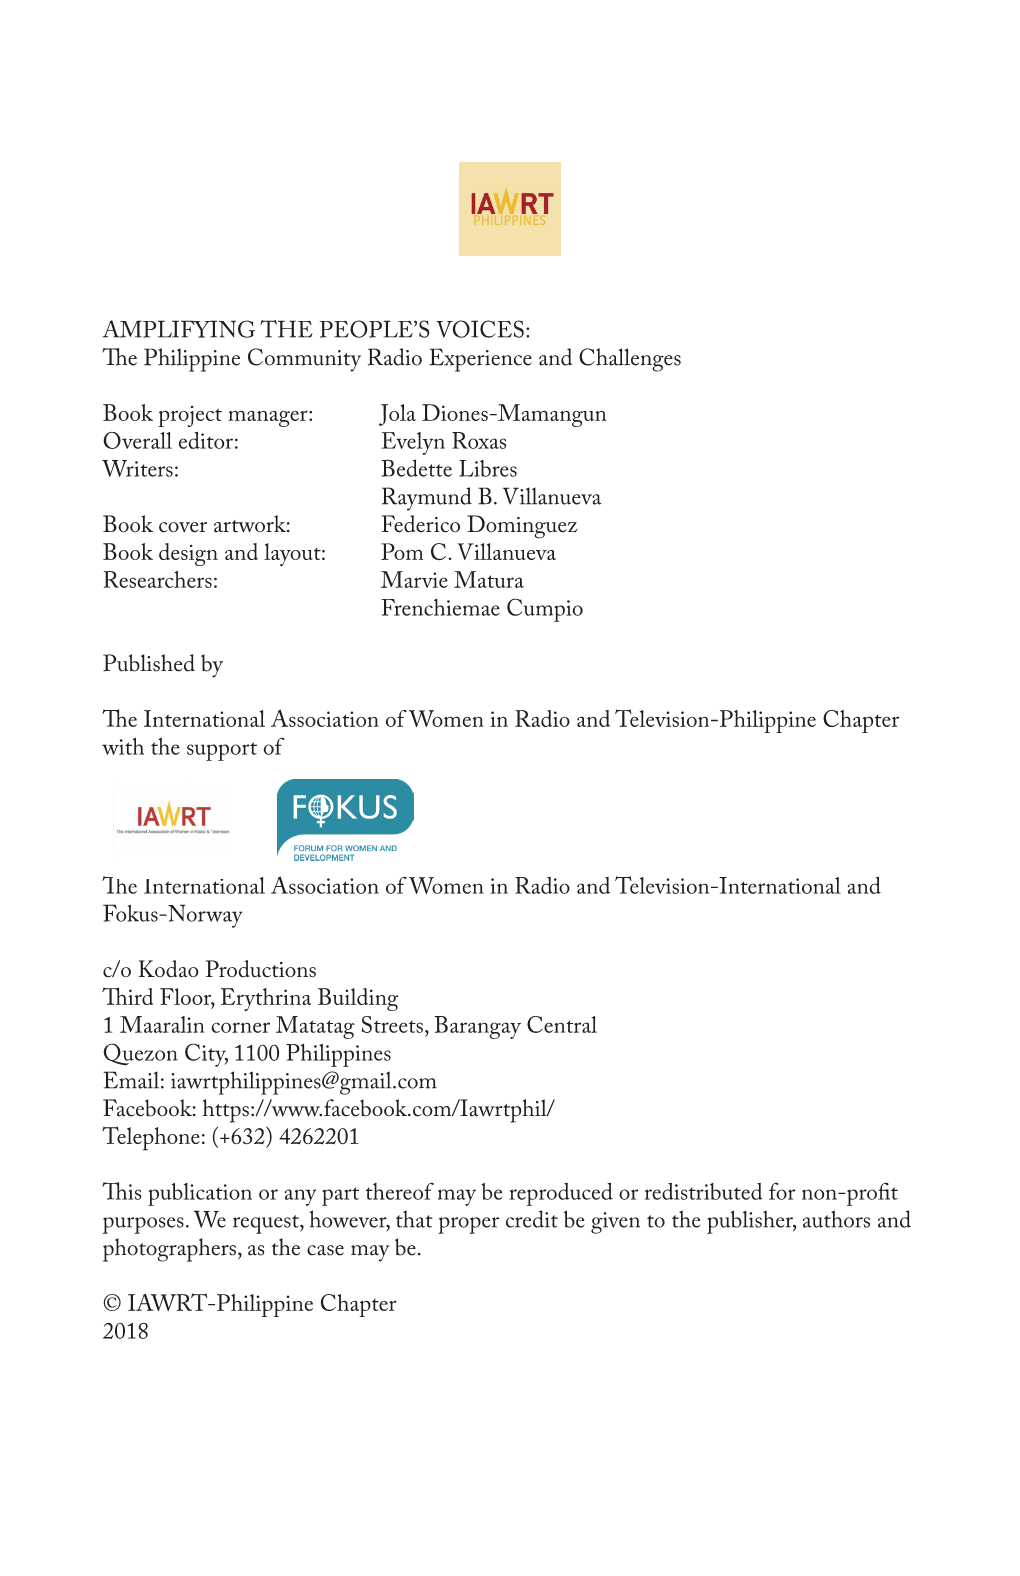 Amplifying the People's Voices: the Philippine Community Radio Experience and Challenge